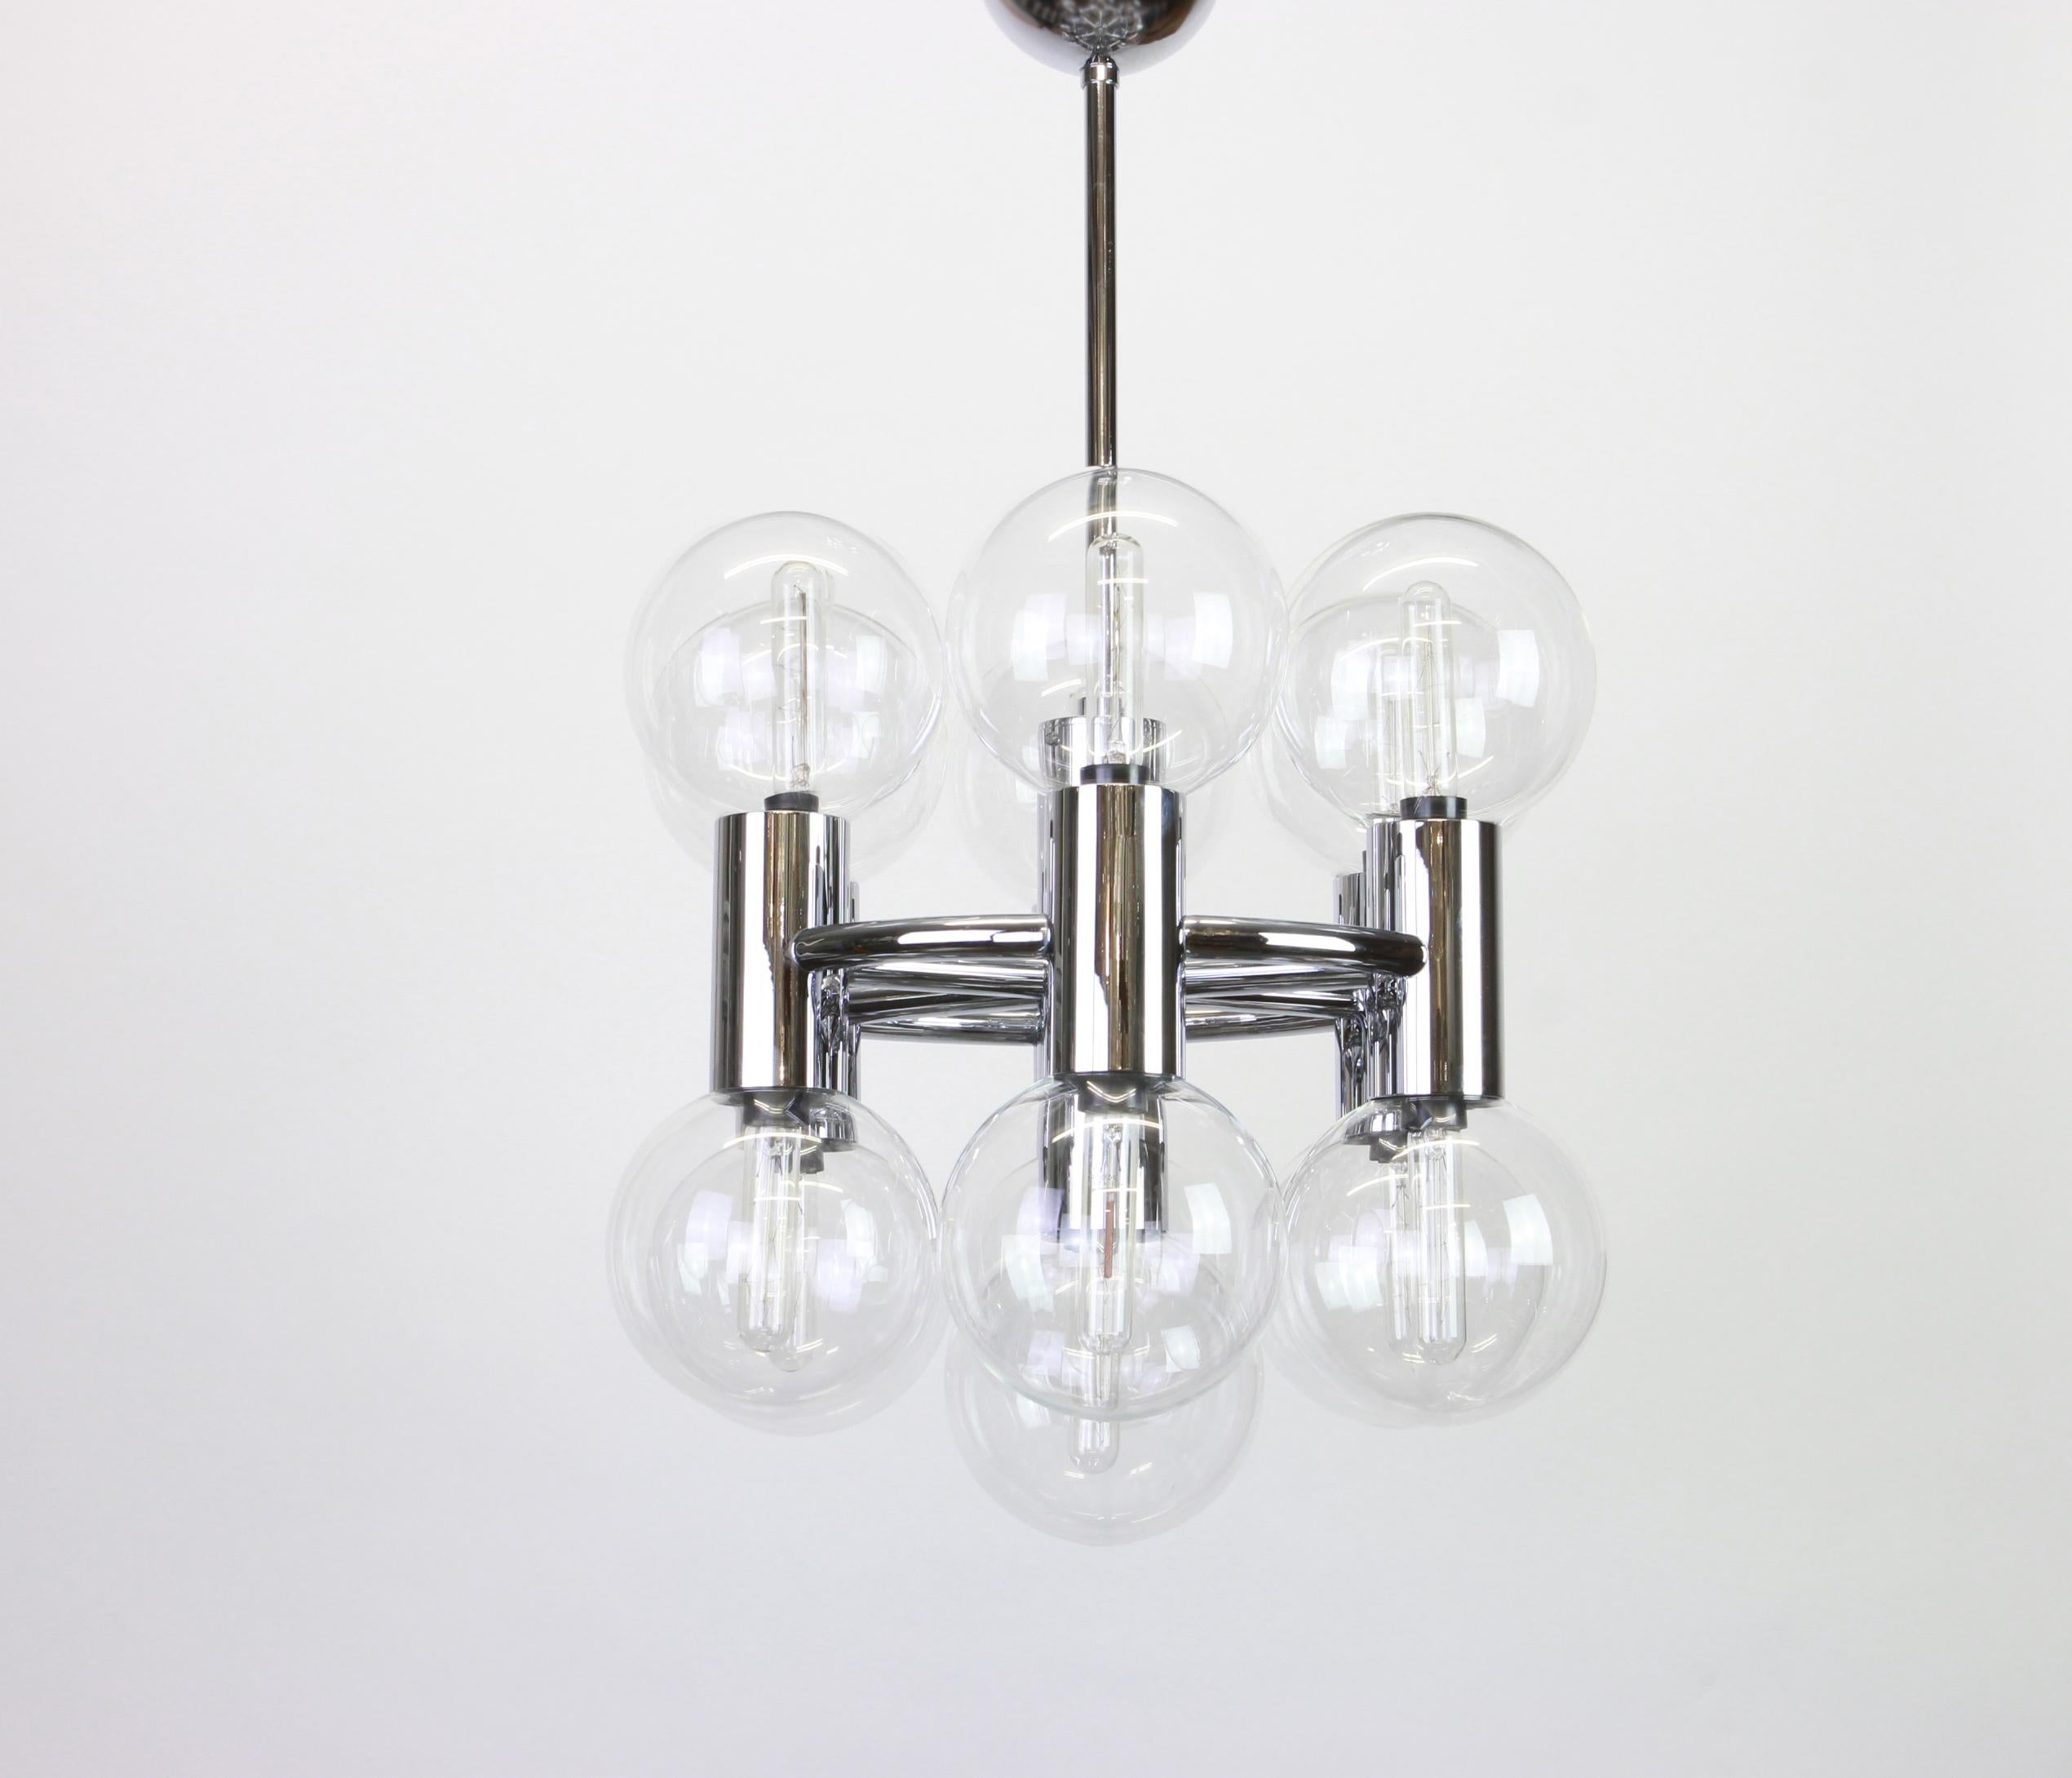 1 of 2 wonderful midcentury sputnik chrome chandelier designed by Motoko Ishii made for Staff Leuchten, manufactured in Germany, circa 1970s.

High quality and in very good condition. Cleaned, well-wired and ready to use. 

The fixture requires